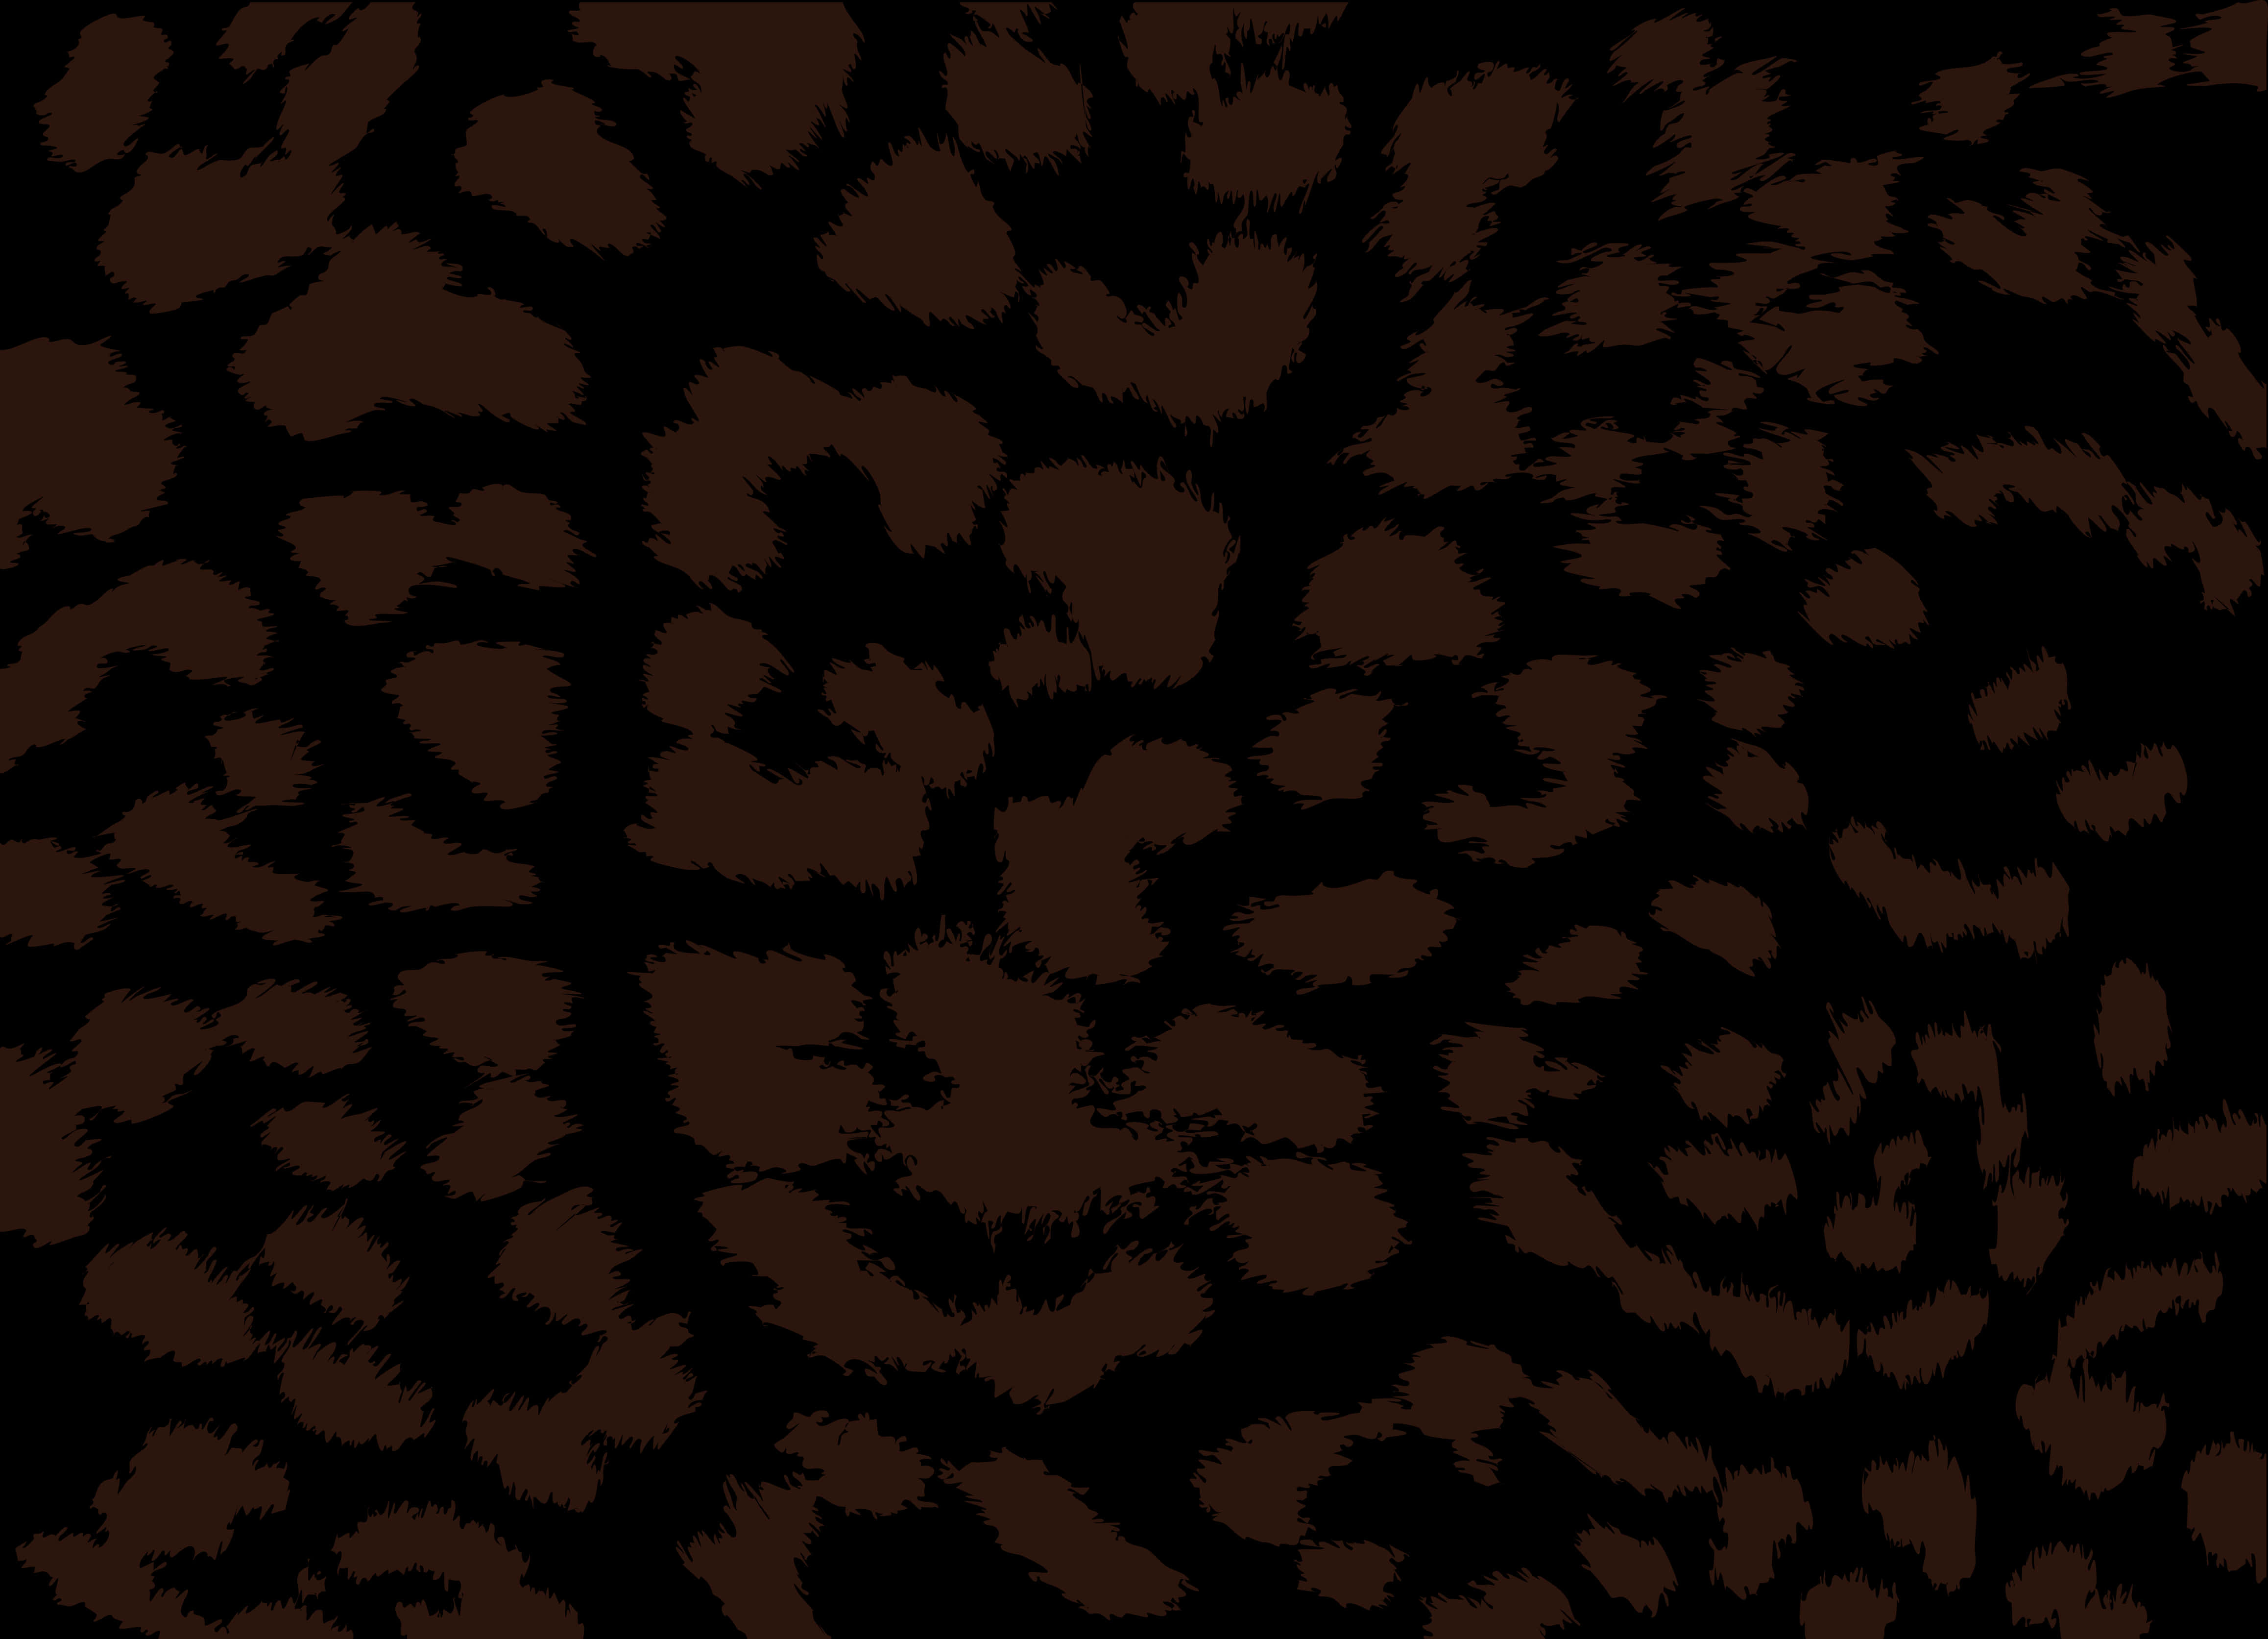 A Close Up Of A Black And Brown Spotted Animal Skin